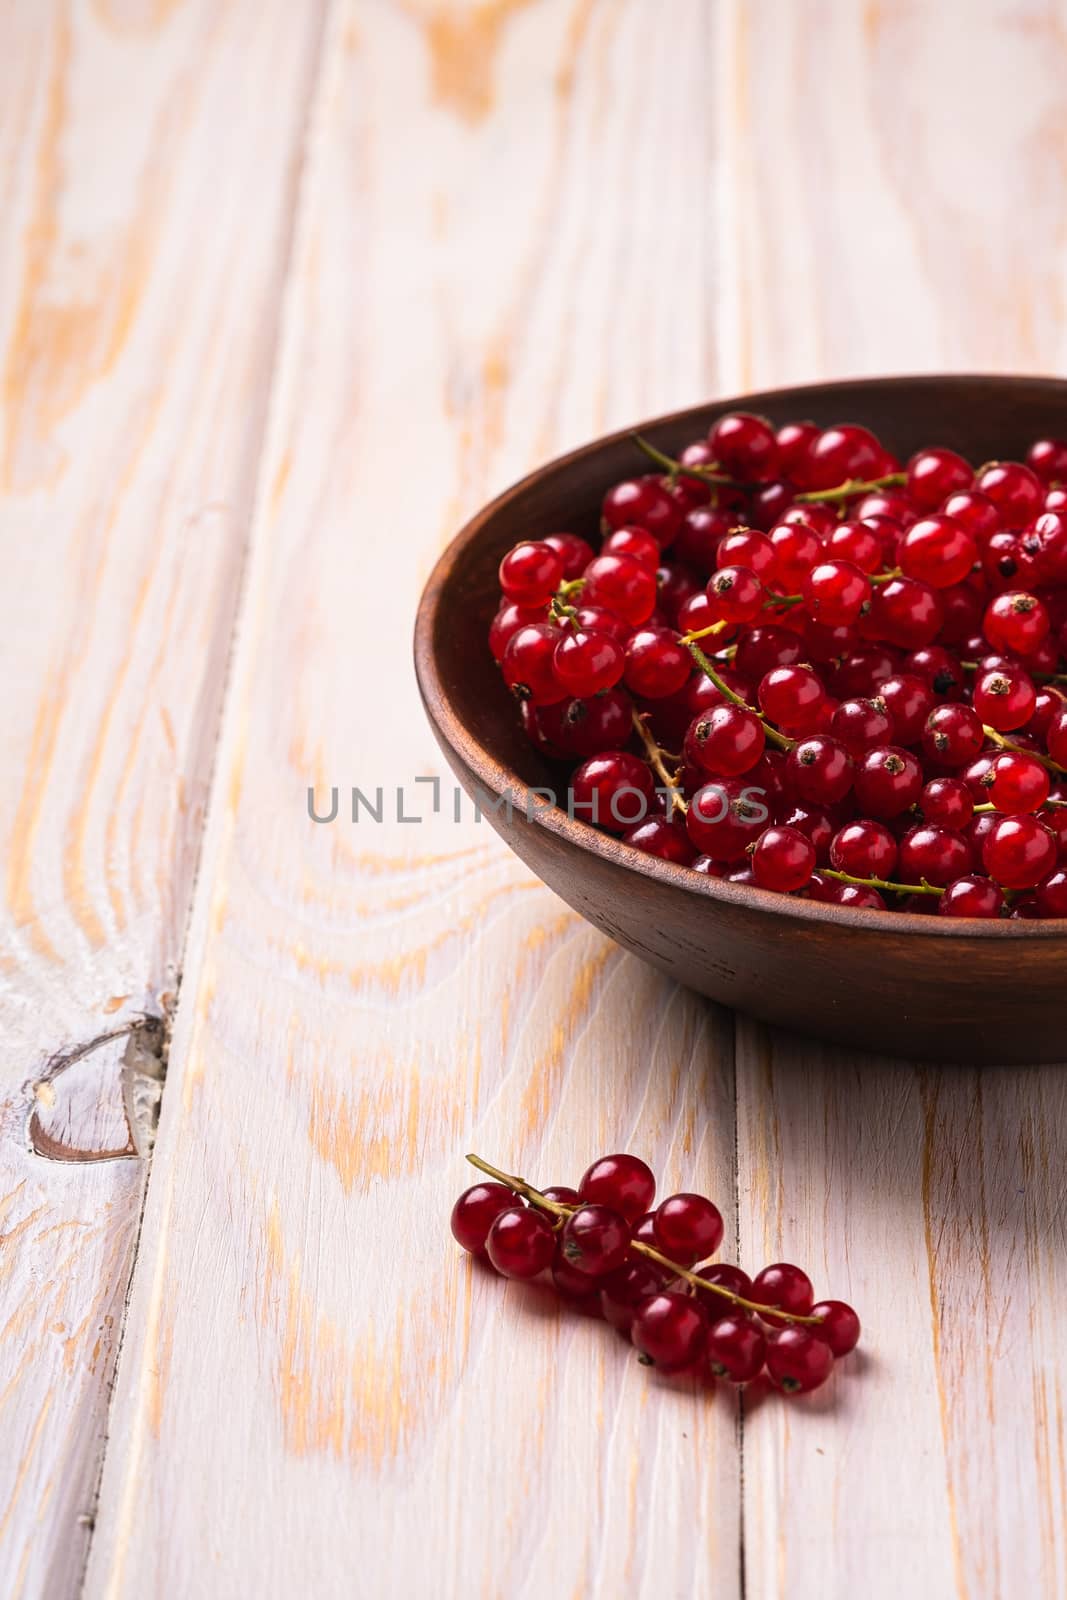 Fresh sweet red currant berries in wooden bowl, wood table background, angle view